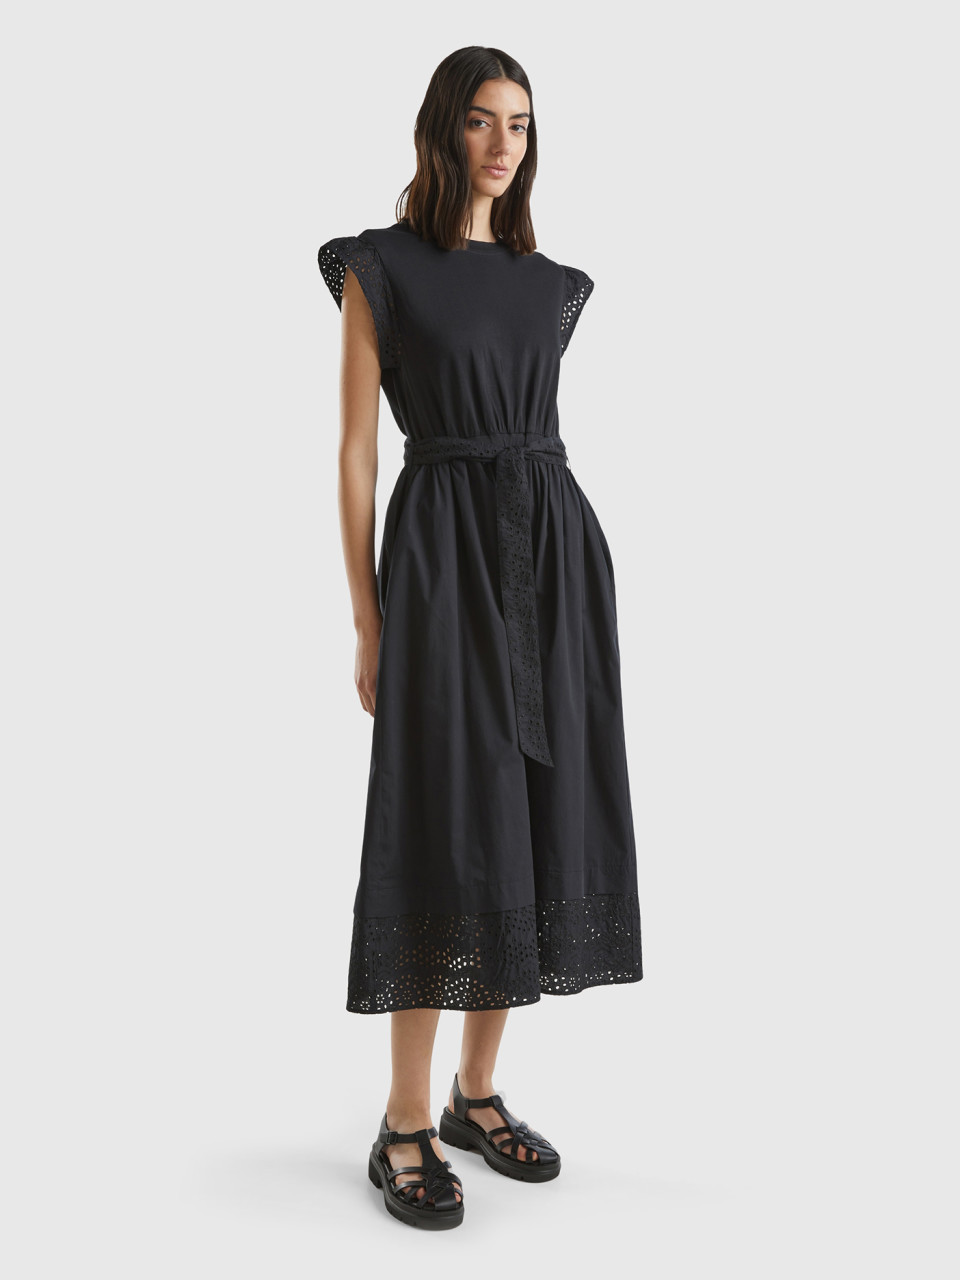 Benetton, Dress With Broderie Anglaise, Black, Women